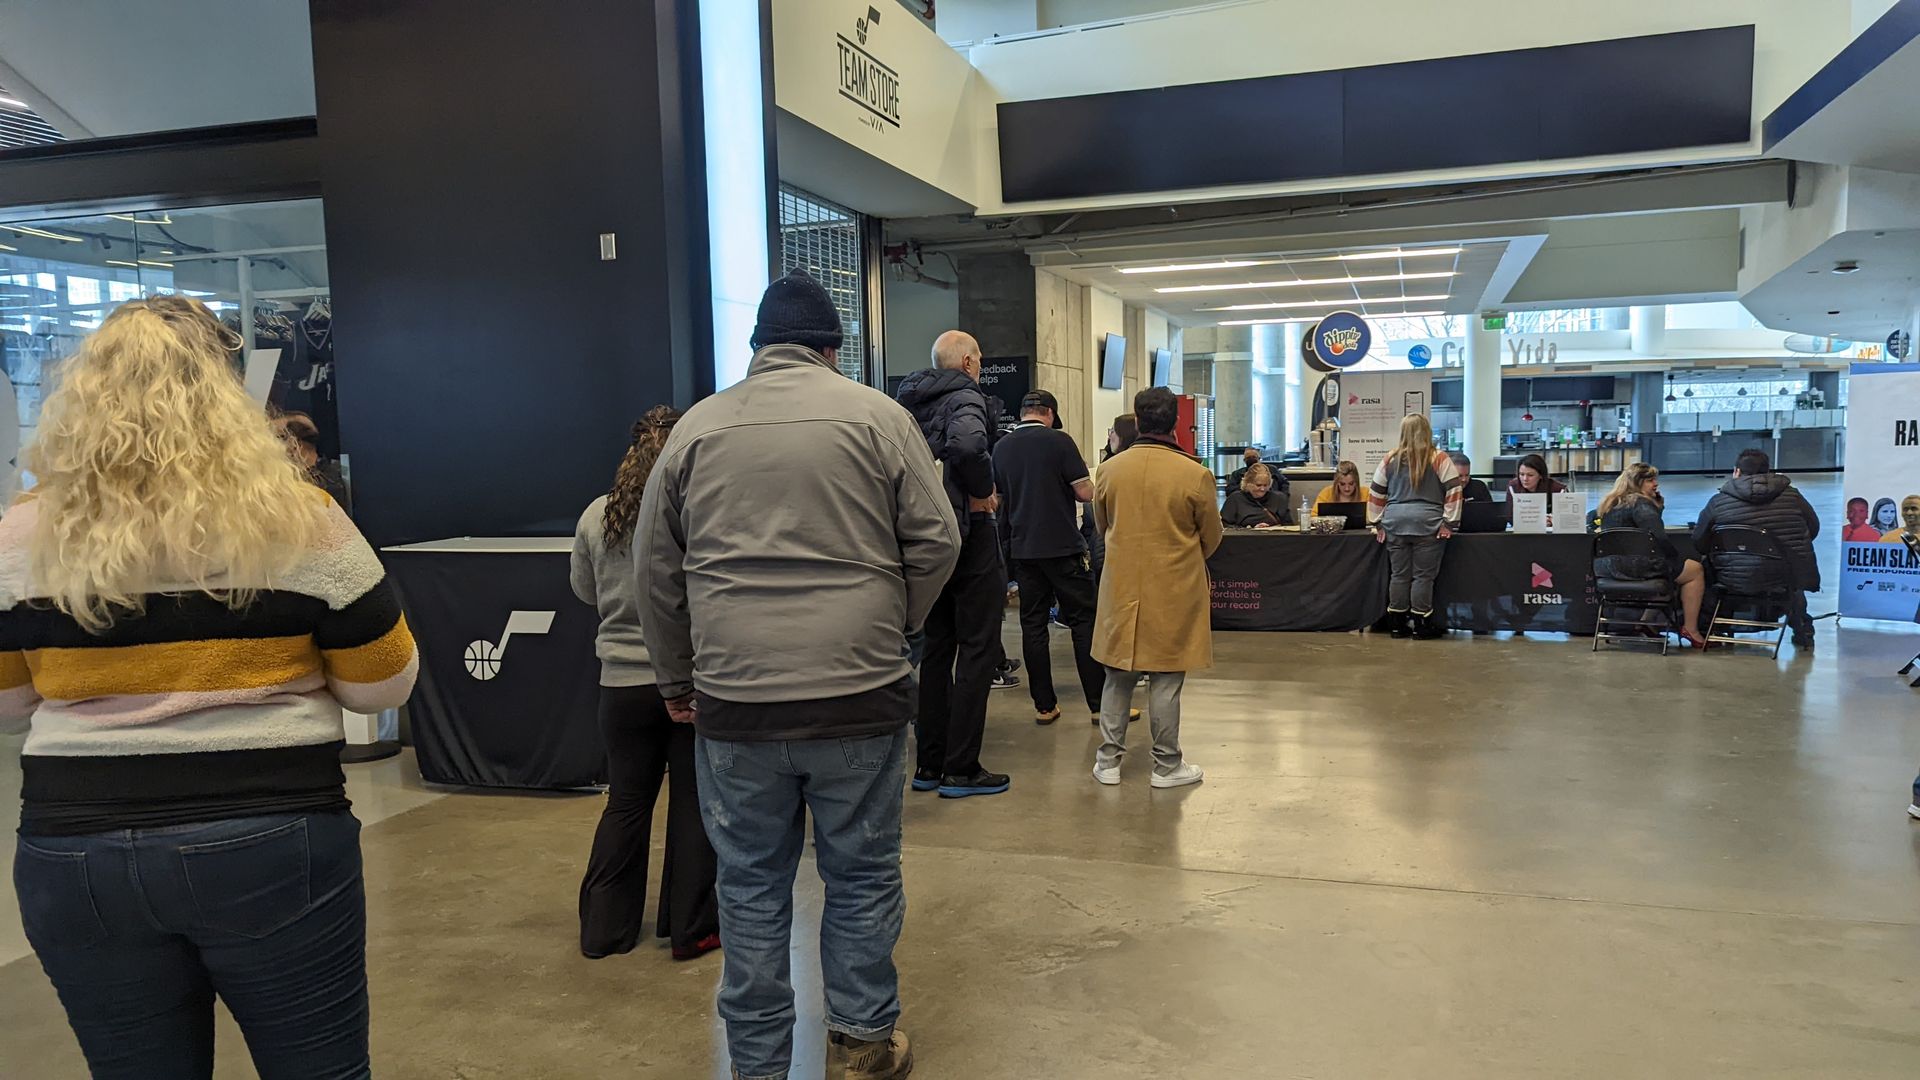 Utahns line up for a free legal clinic to help expunge low-level criminal records at Vivint Arena.